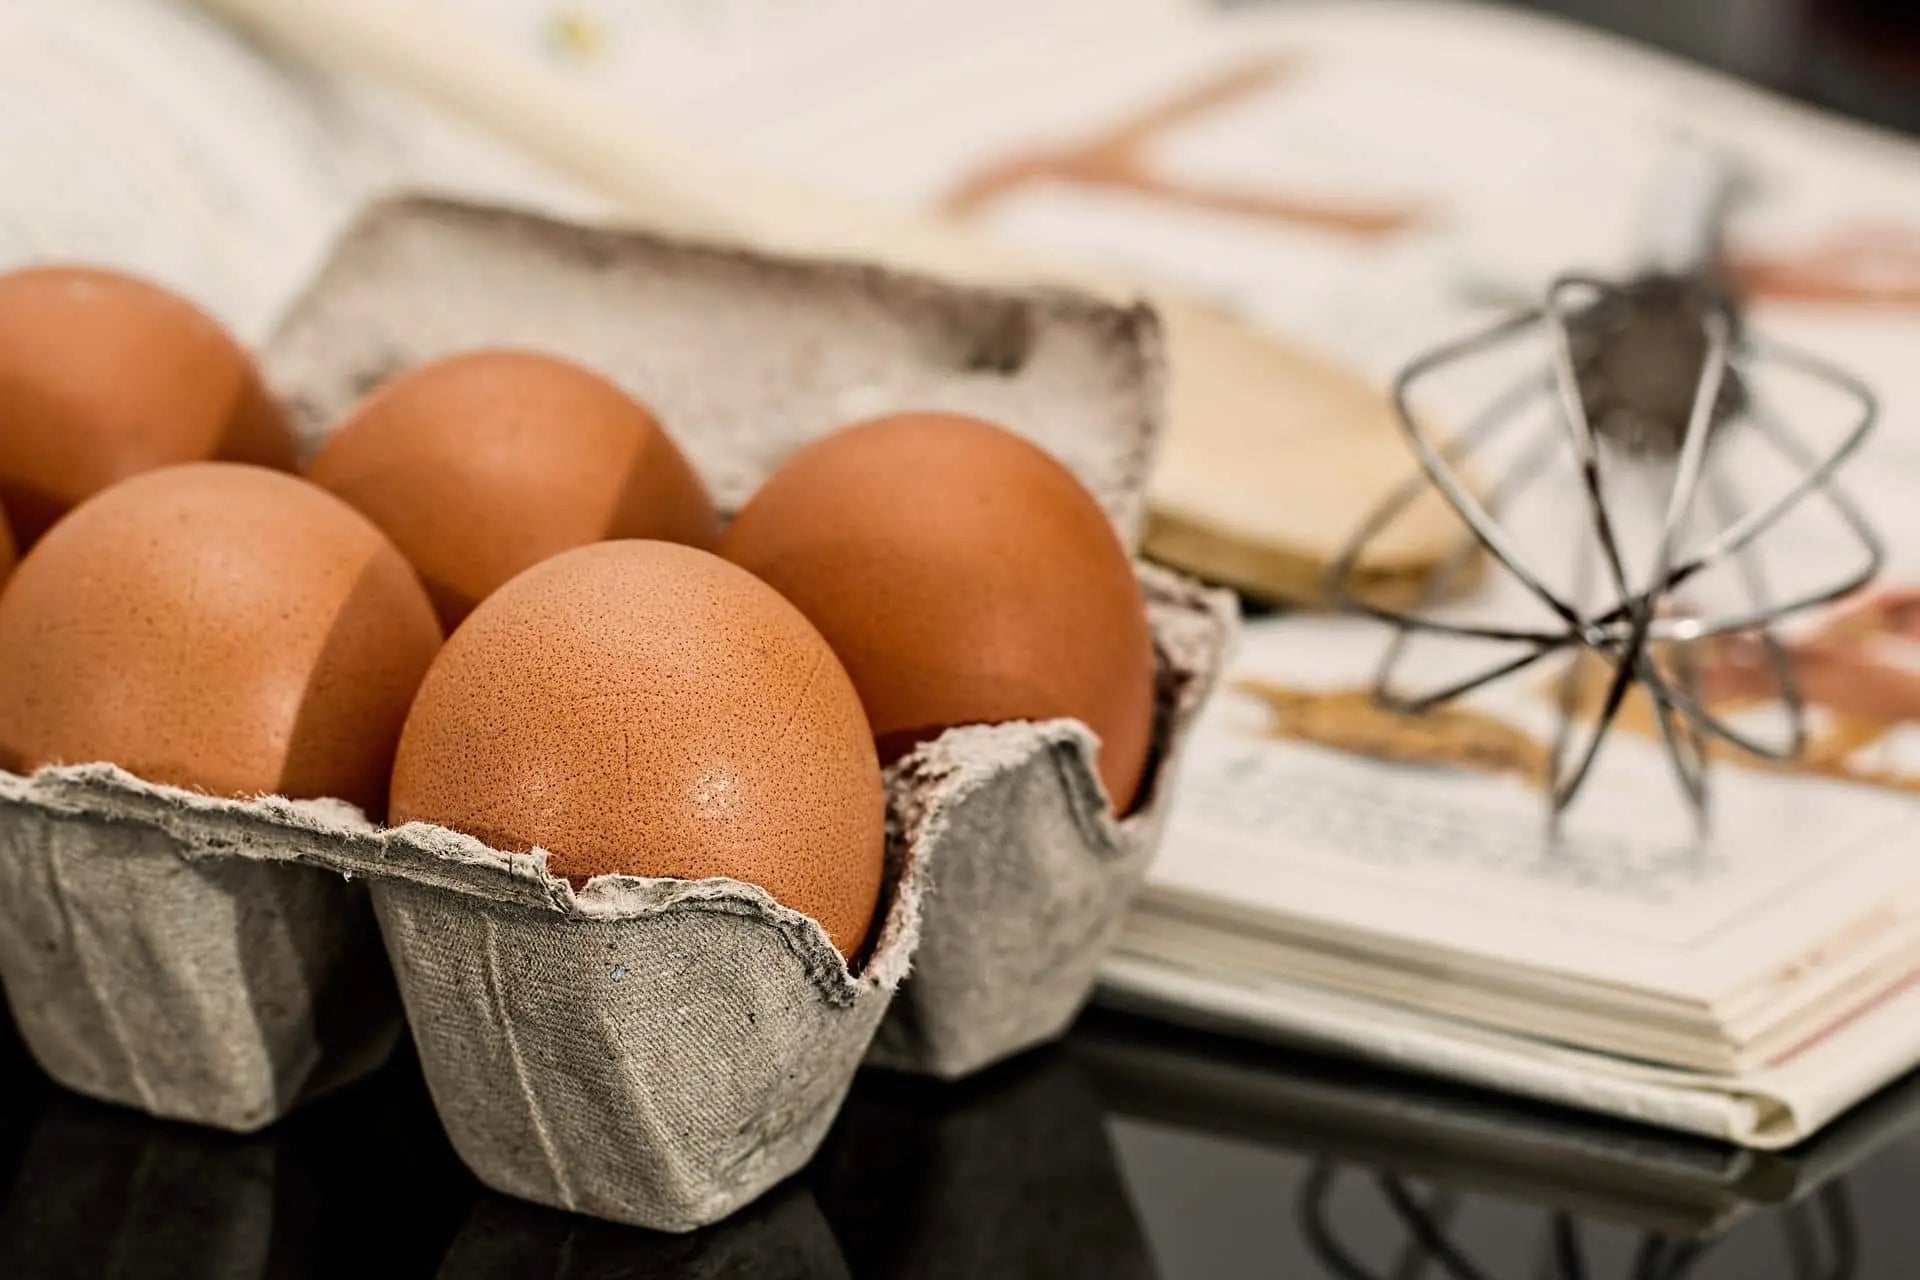 Eggs and whisk on the table with a cookbook